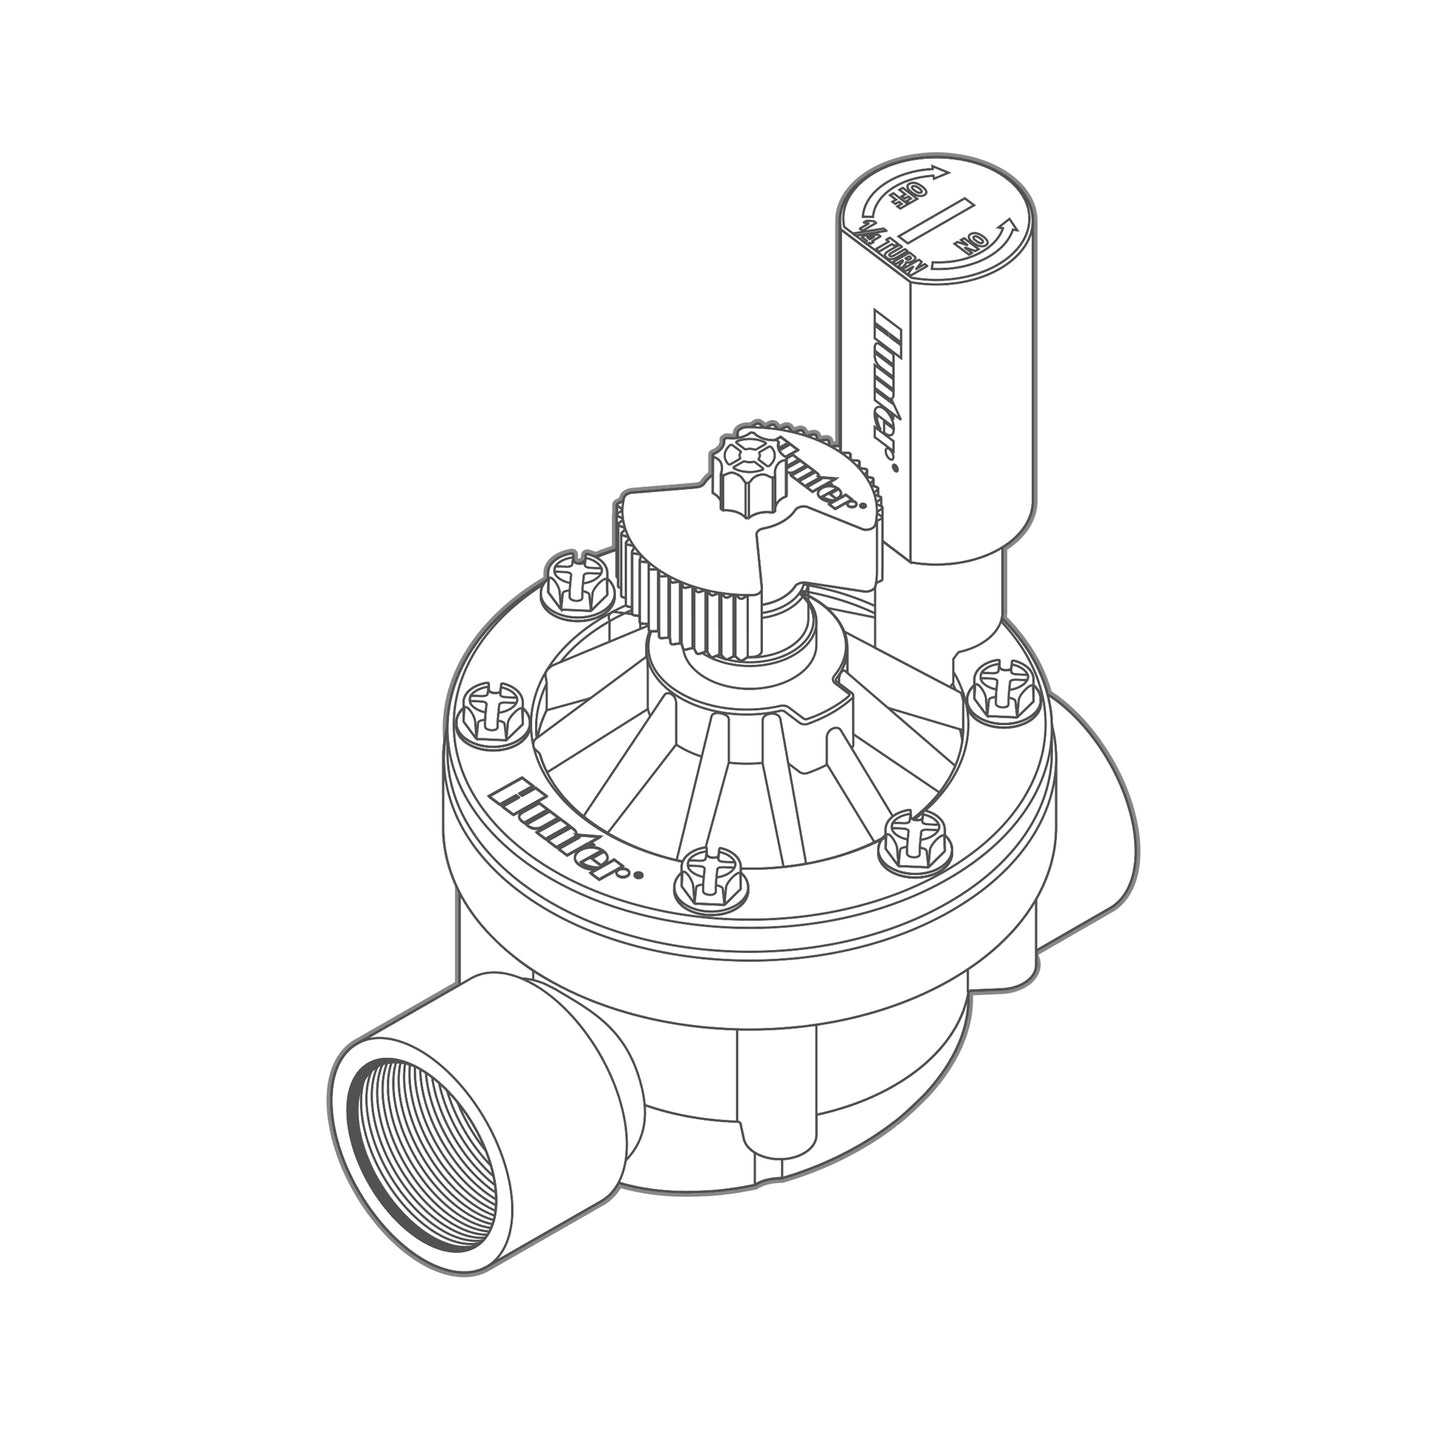 ICV-151G - 1-1/2" FPT Commercial Irrigation Valve with Flow Control - ICV Series